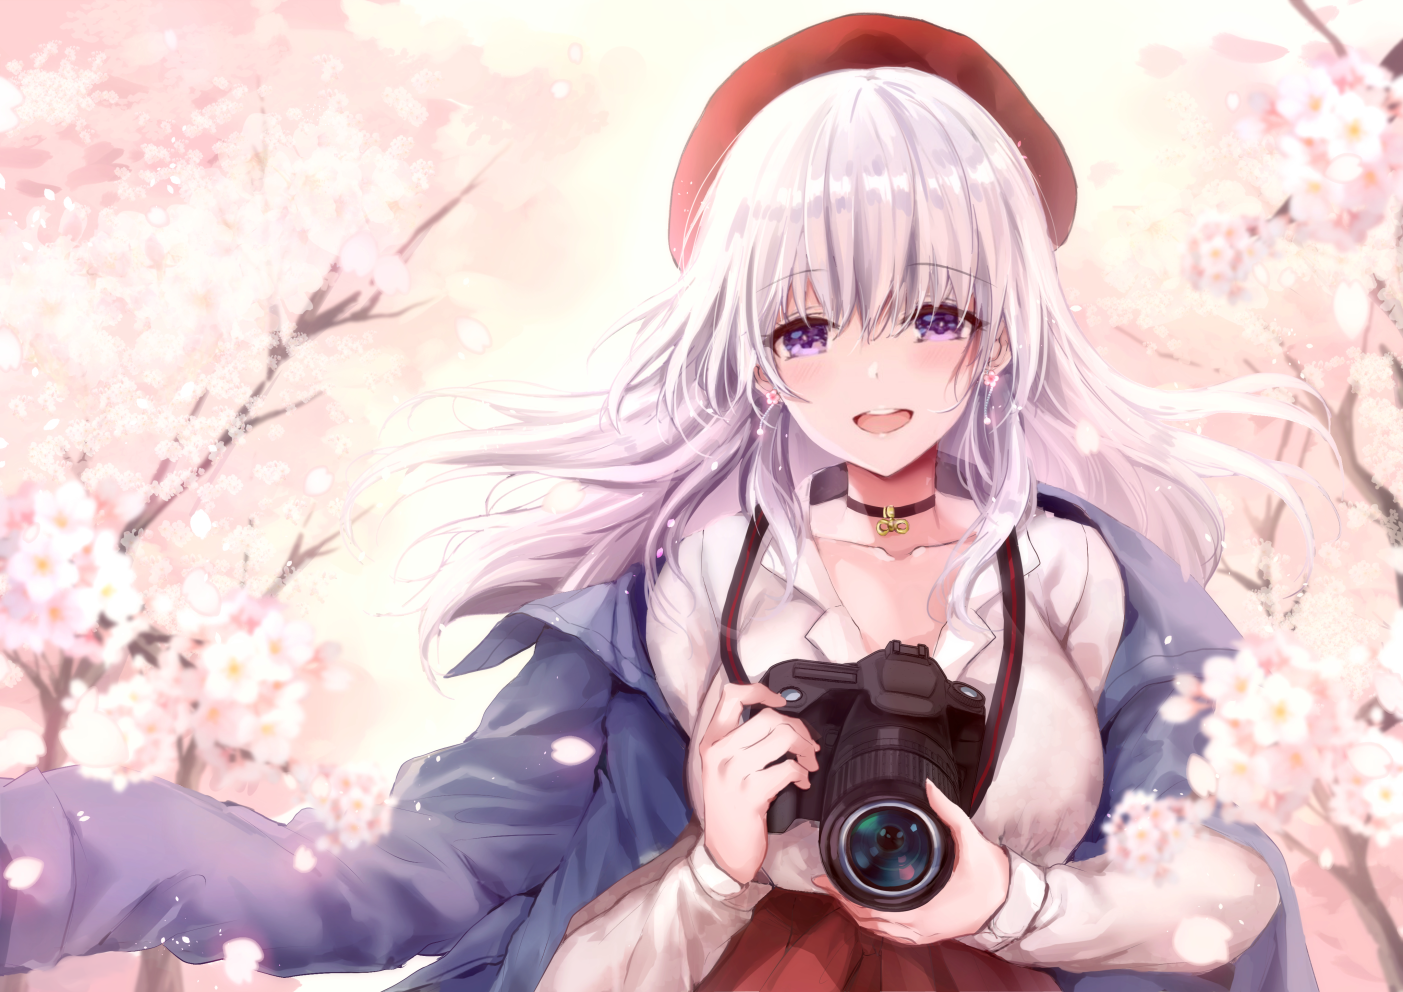 Smile for YOU.-悠莉ちゃん原创